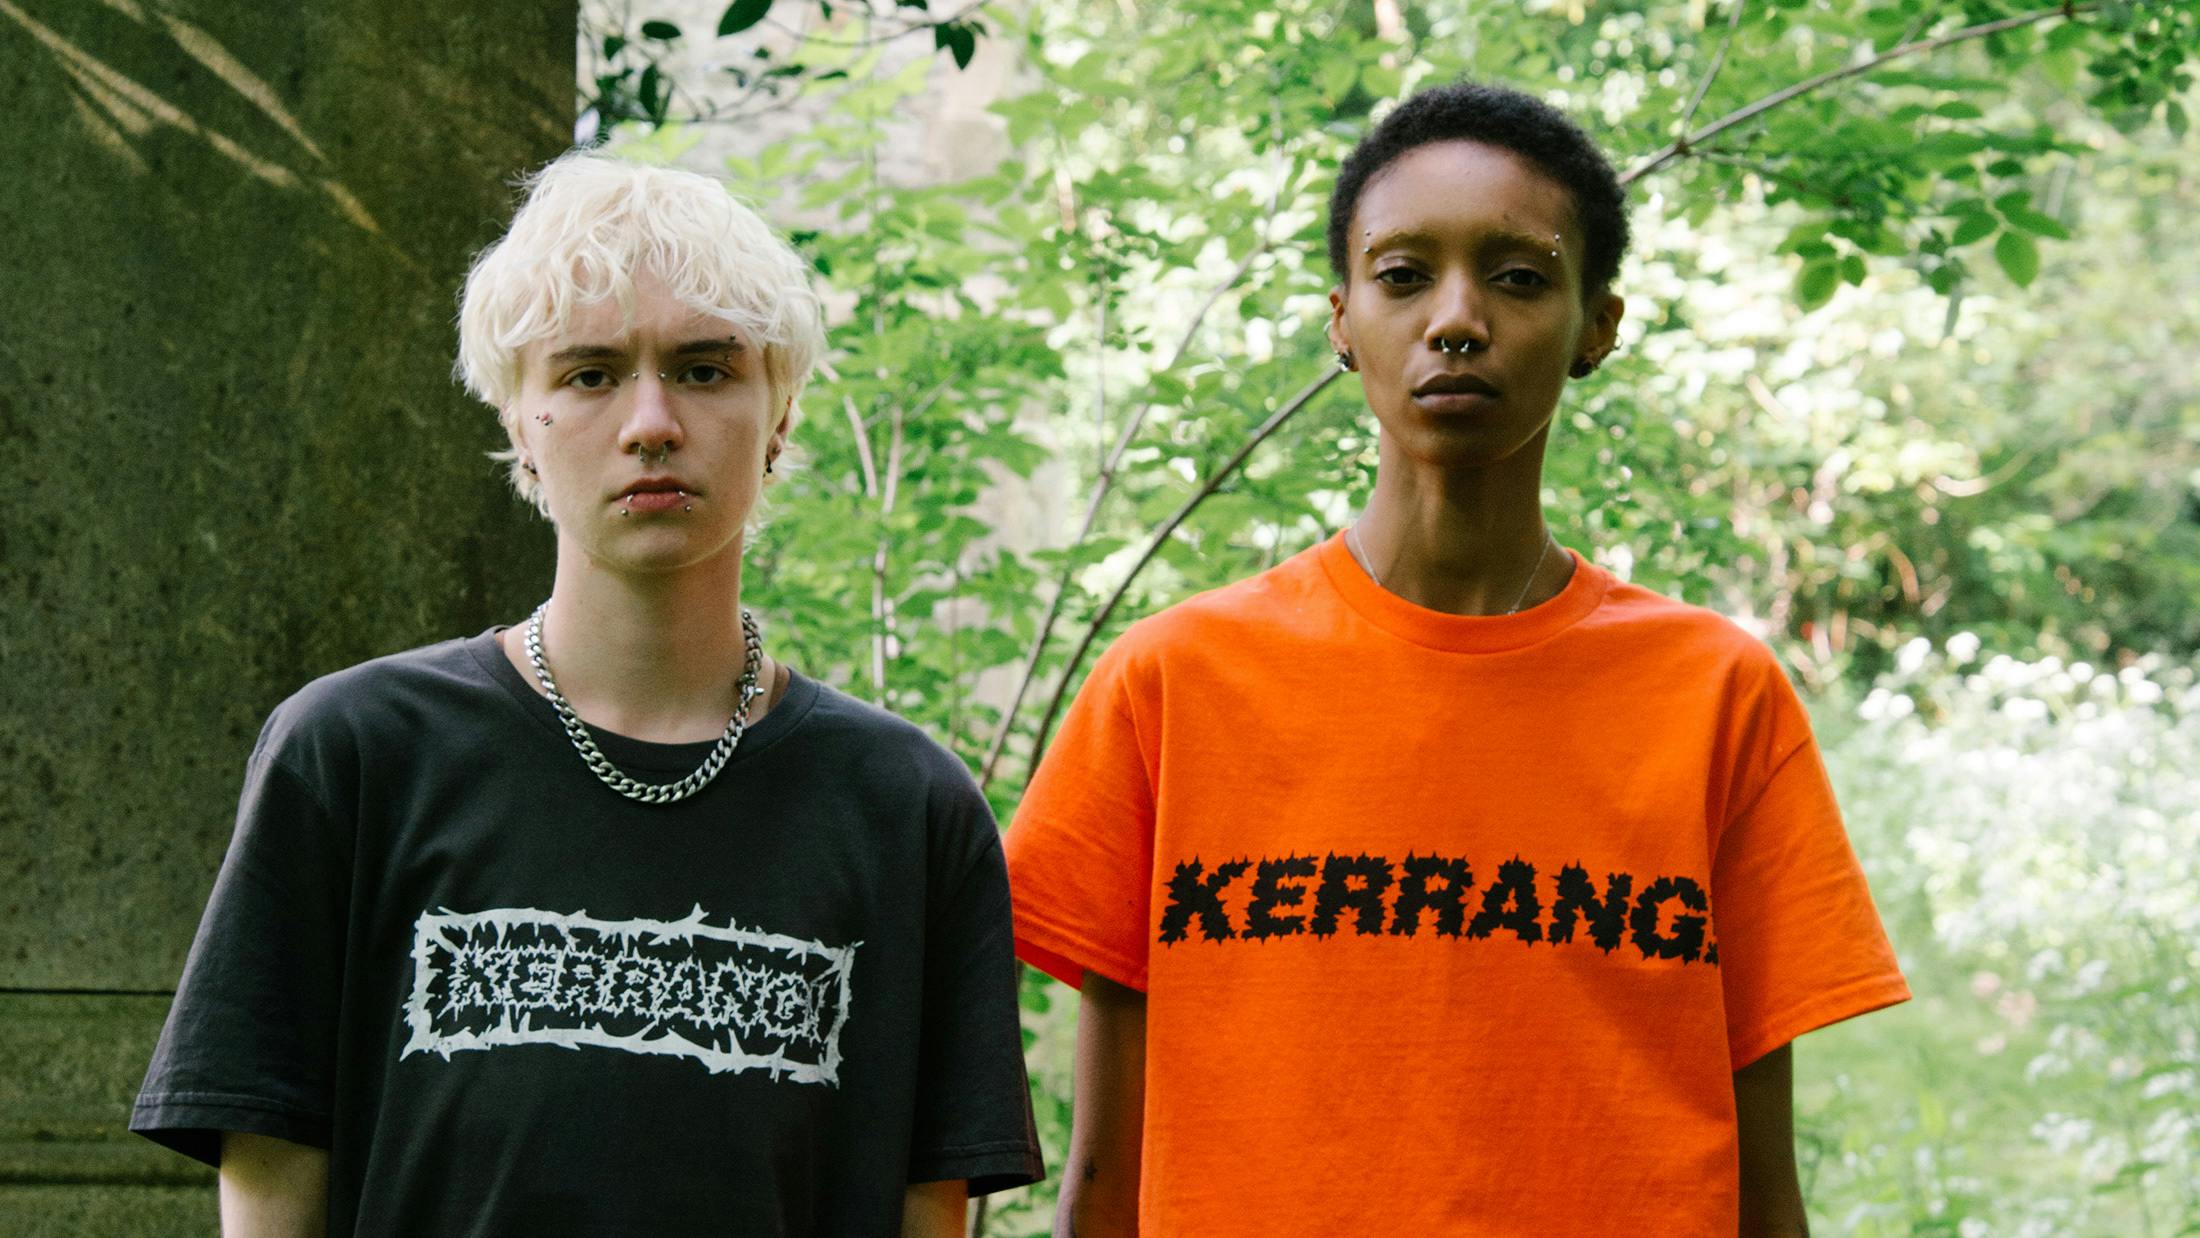 Kerrang! releases first apparel collection